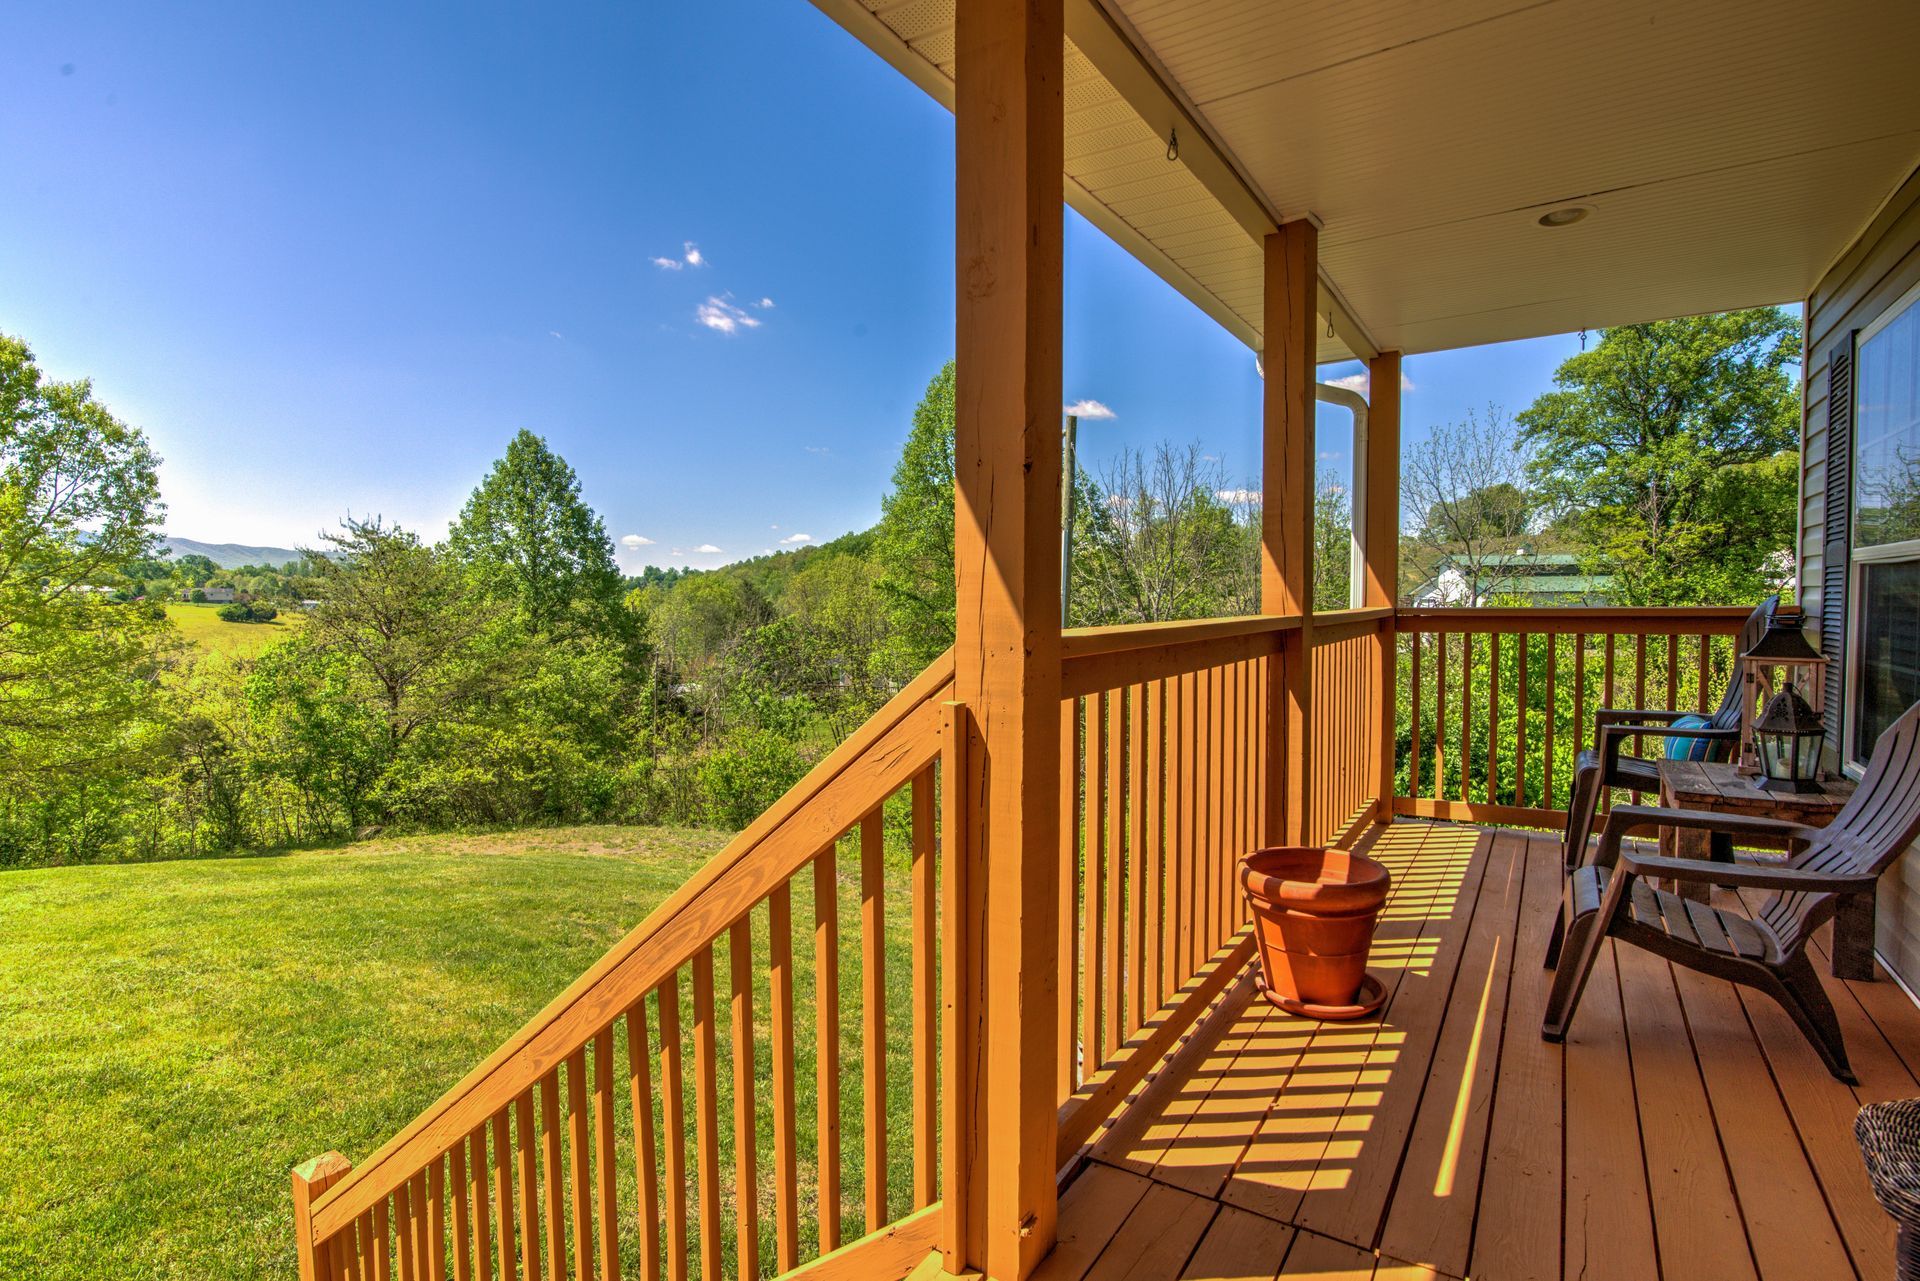 Bristol Tennessee Short-Term Rental Front Porch overlooking yard near the river